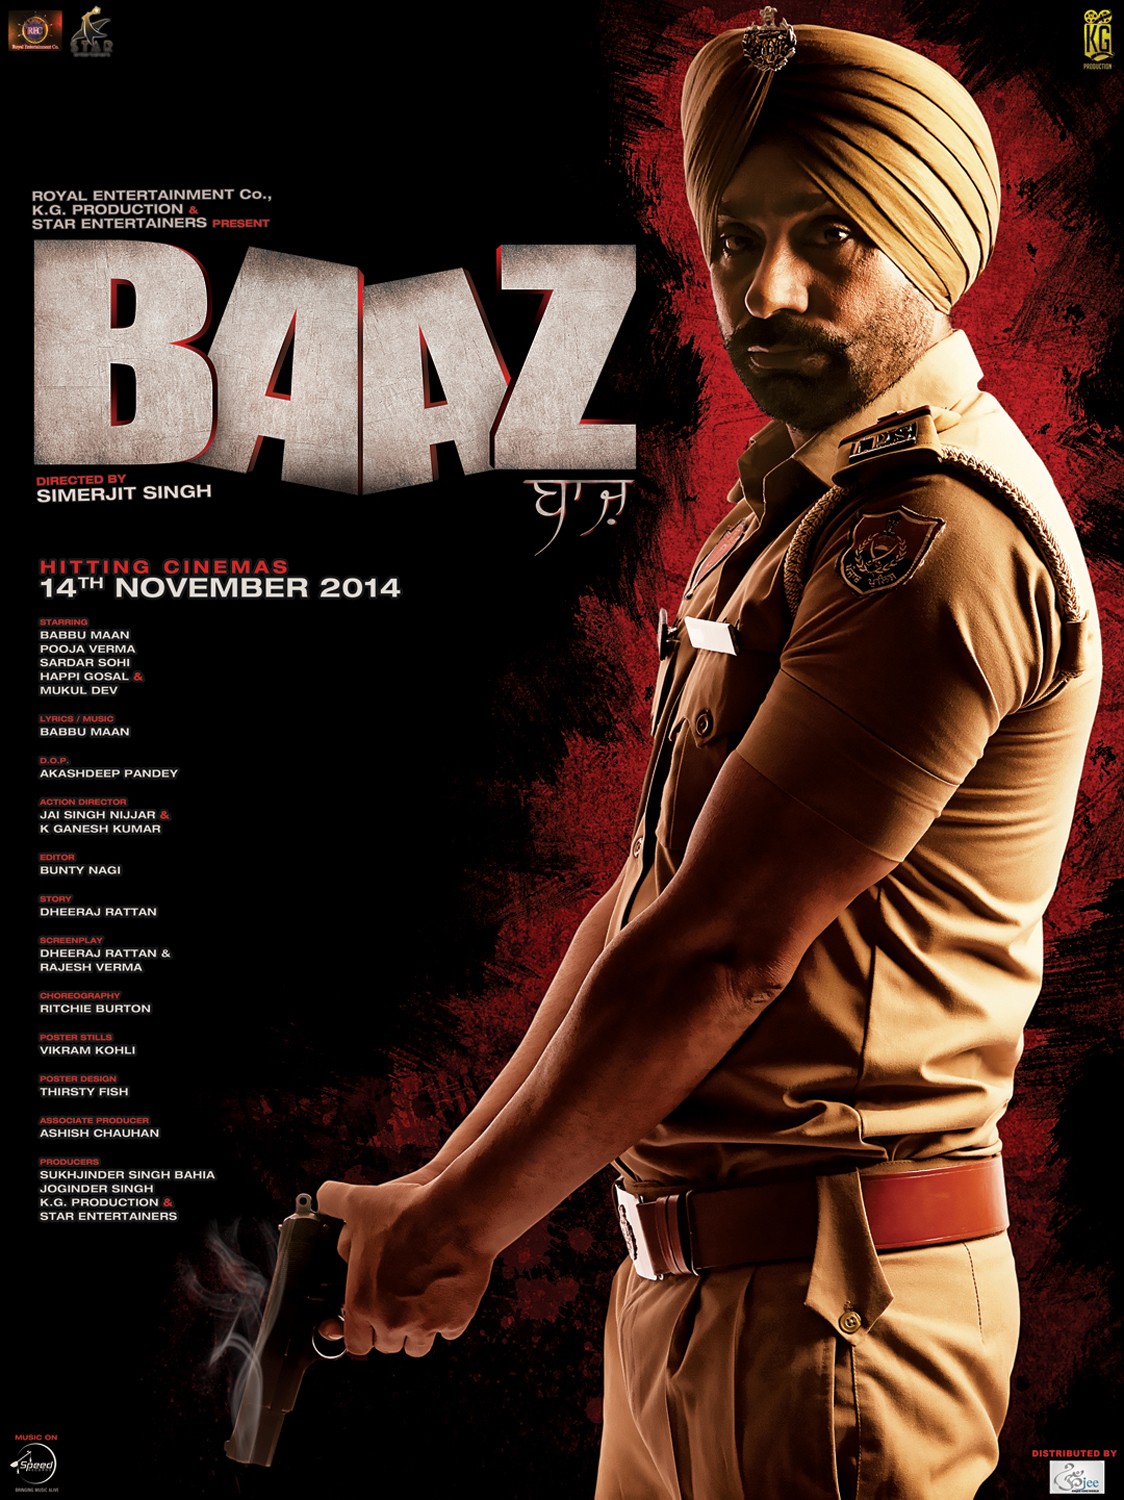 Extra Large Movie Poster Image for Baaz (#3 of 4)